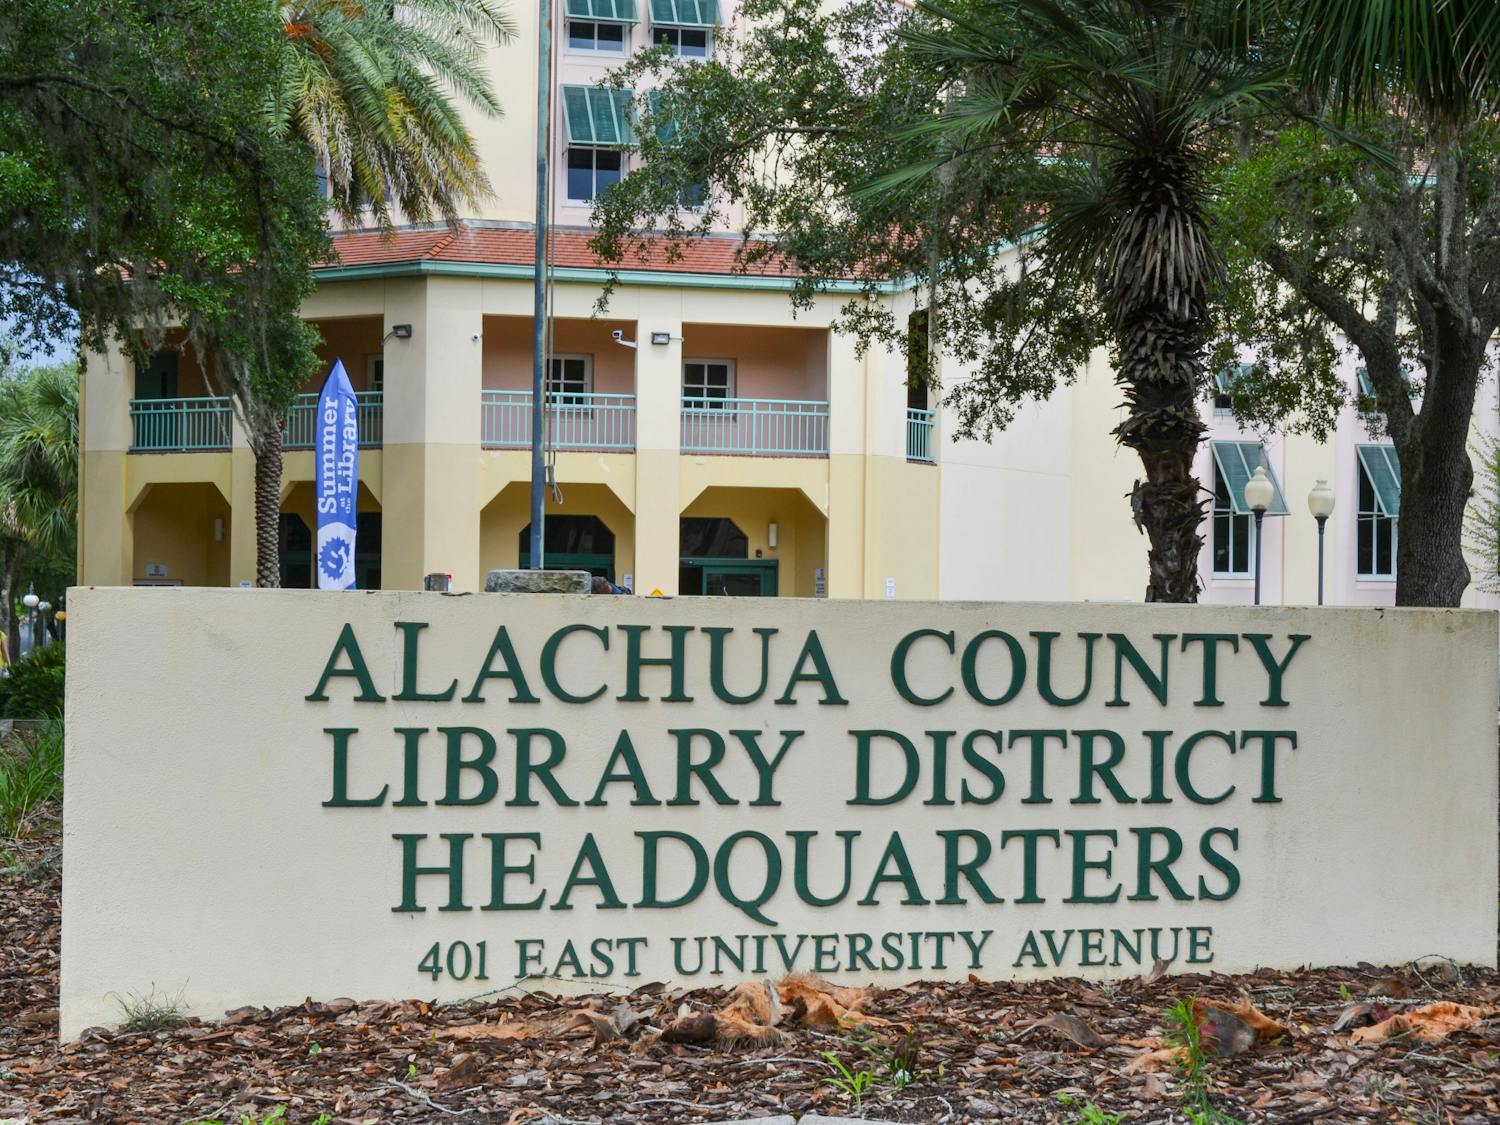 The Alachua County Library District downtown headquarters, located at 401 E University Ave in Gainesville on Monday, July 12, 2021. The Alachua County Library District is hosting its eighth annual summer art show in August; due to the COVID-19 pandemic, this year's event is virtual. 